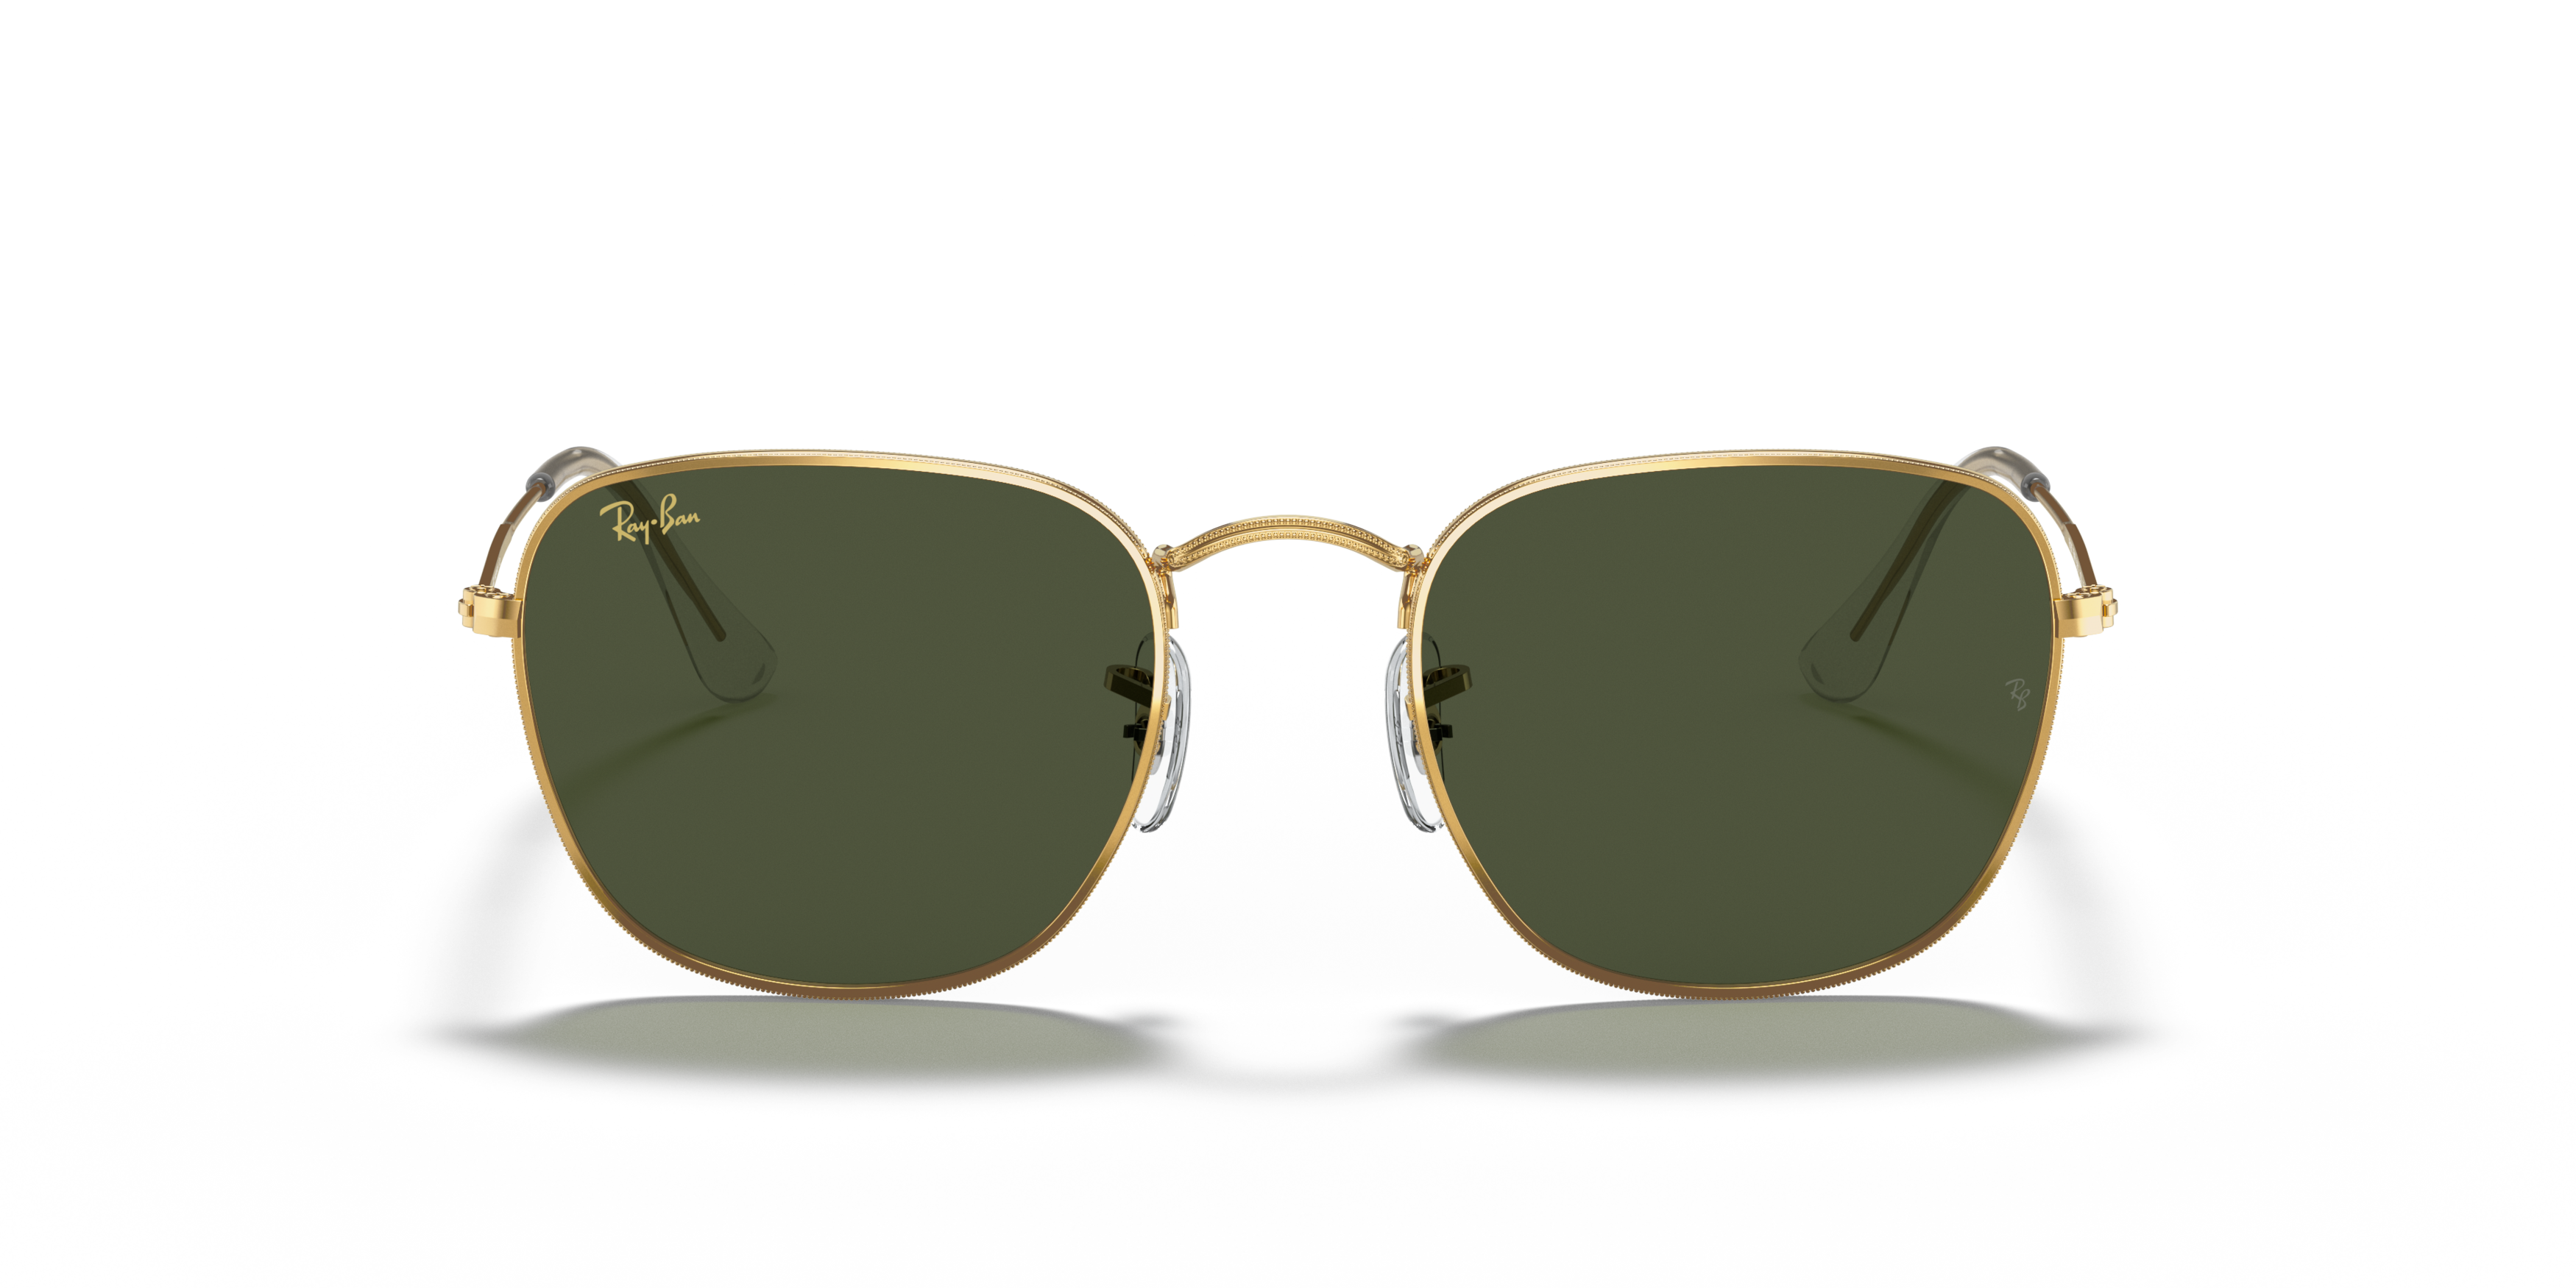 [products.image.front] RAY-BAN RB3857 919631